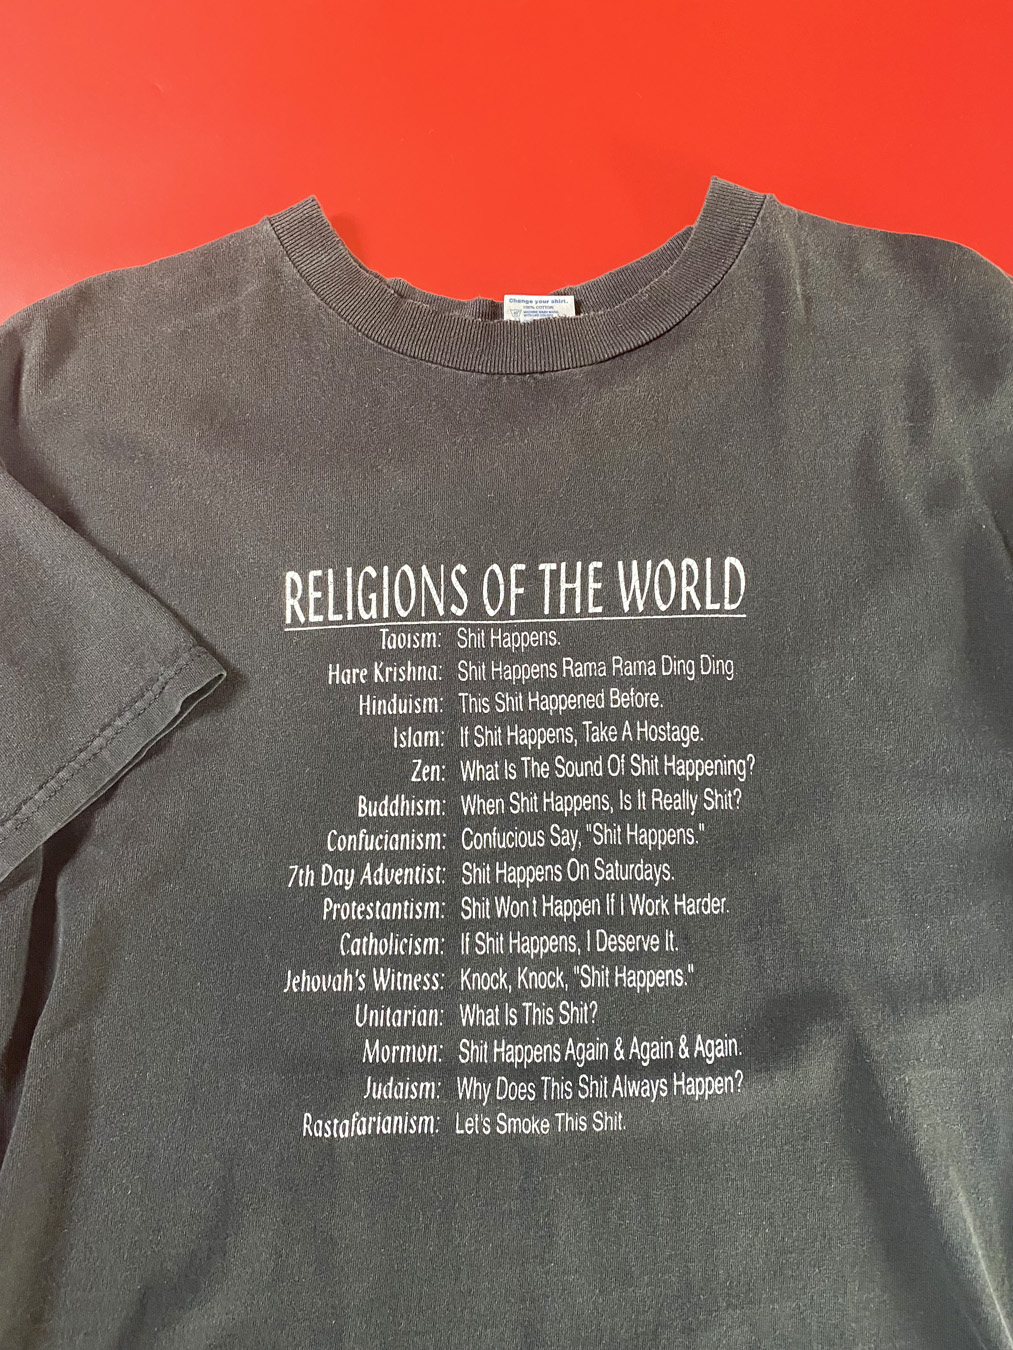 Vintage Religions of the World 'Shit Happens' T-Shirt - 5 Star Vintage